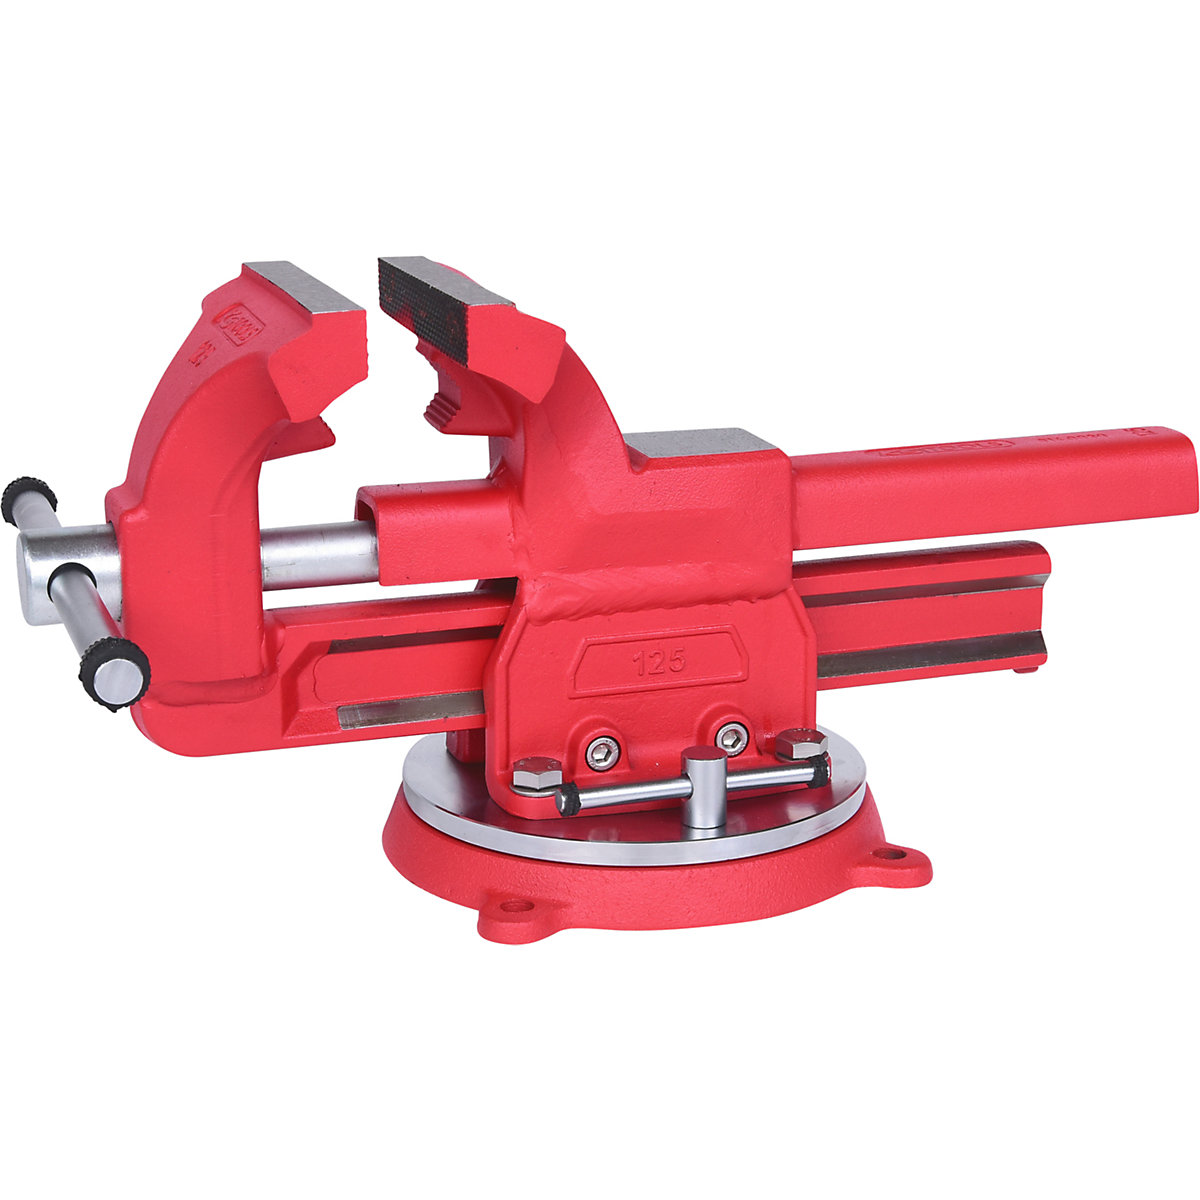 Parallel vice with round plate - KS Tools